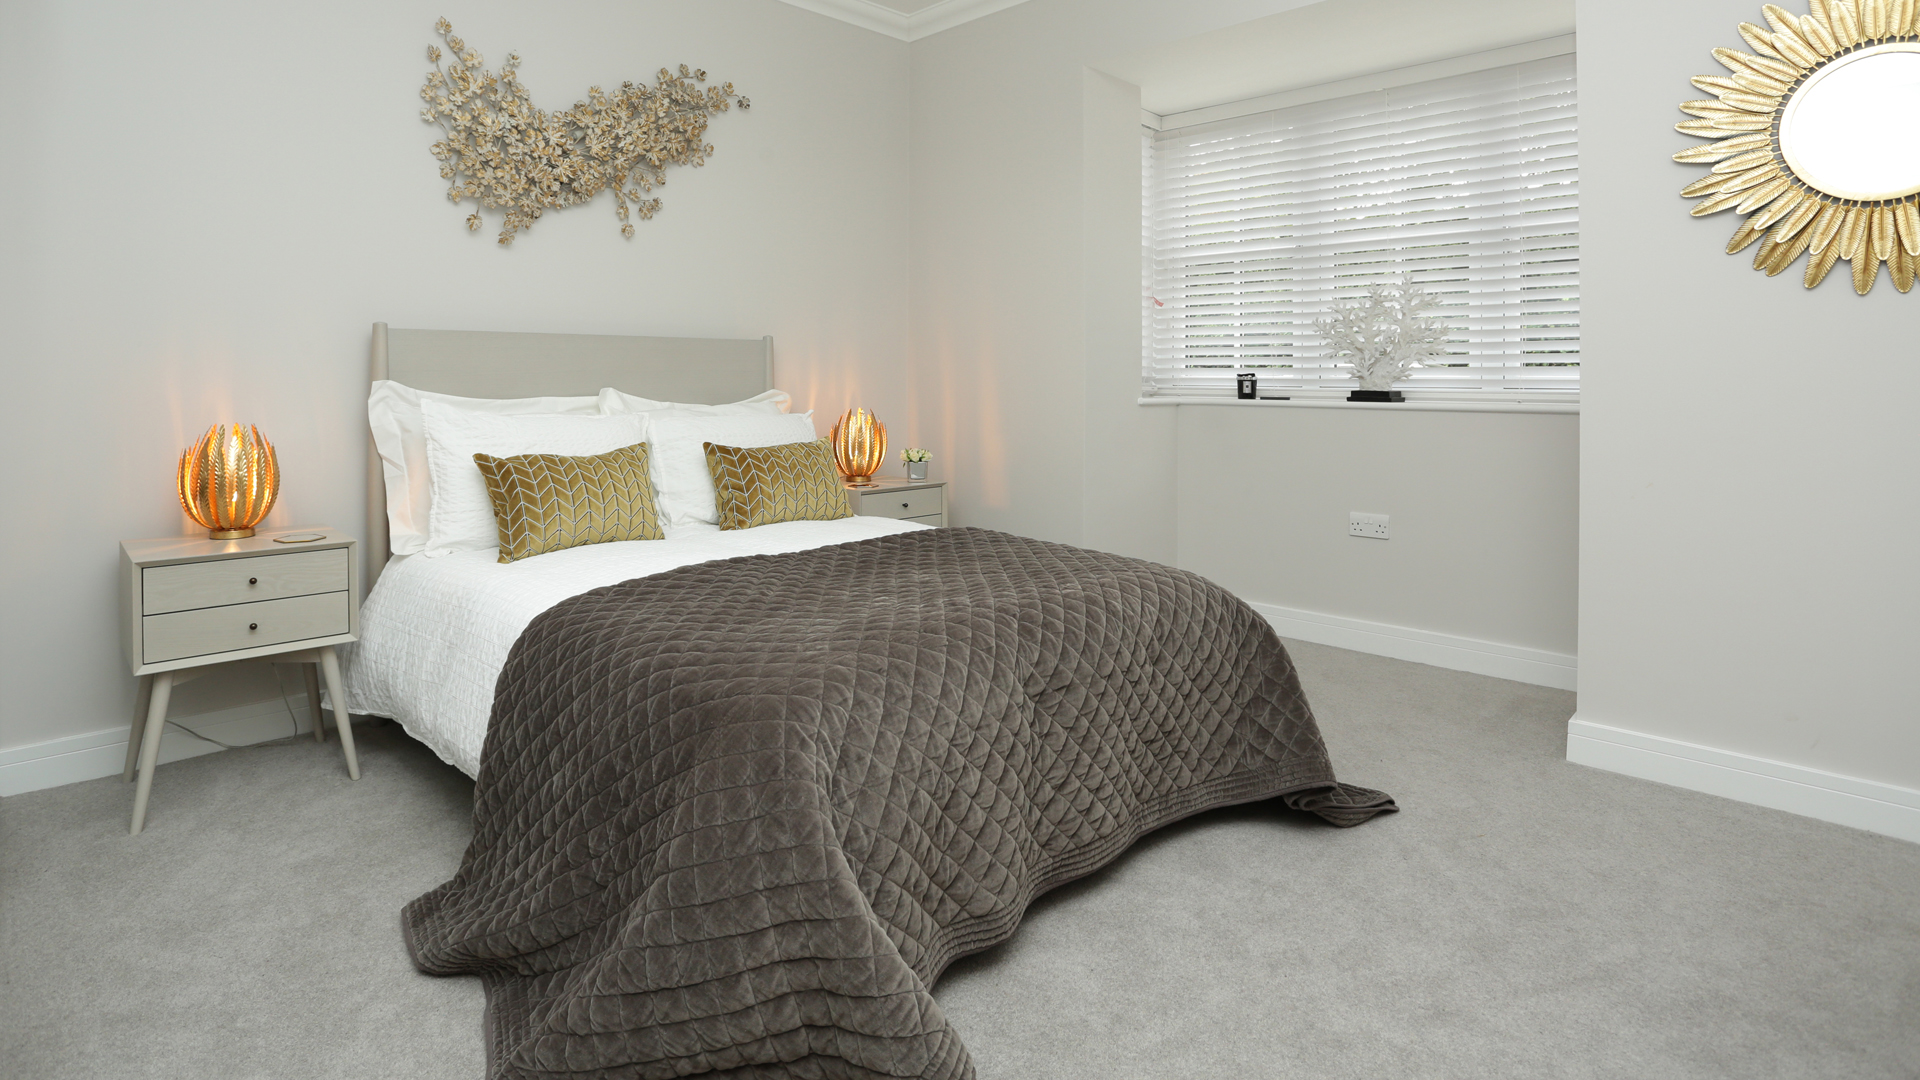 Cobnut Park plot 6 master bedroom in cream with gold features.